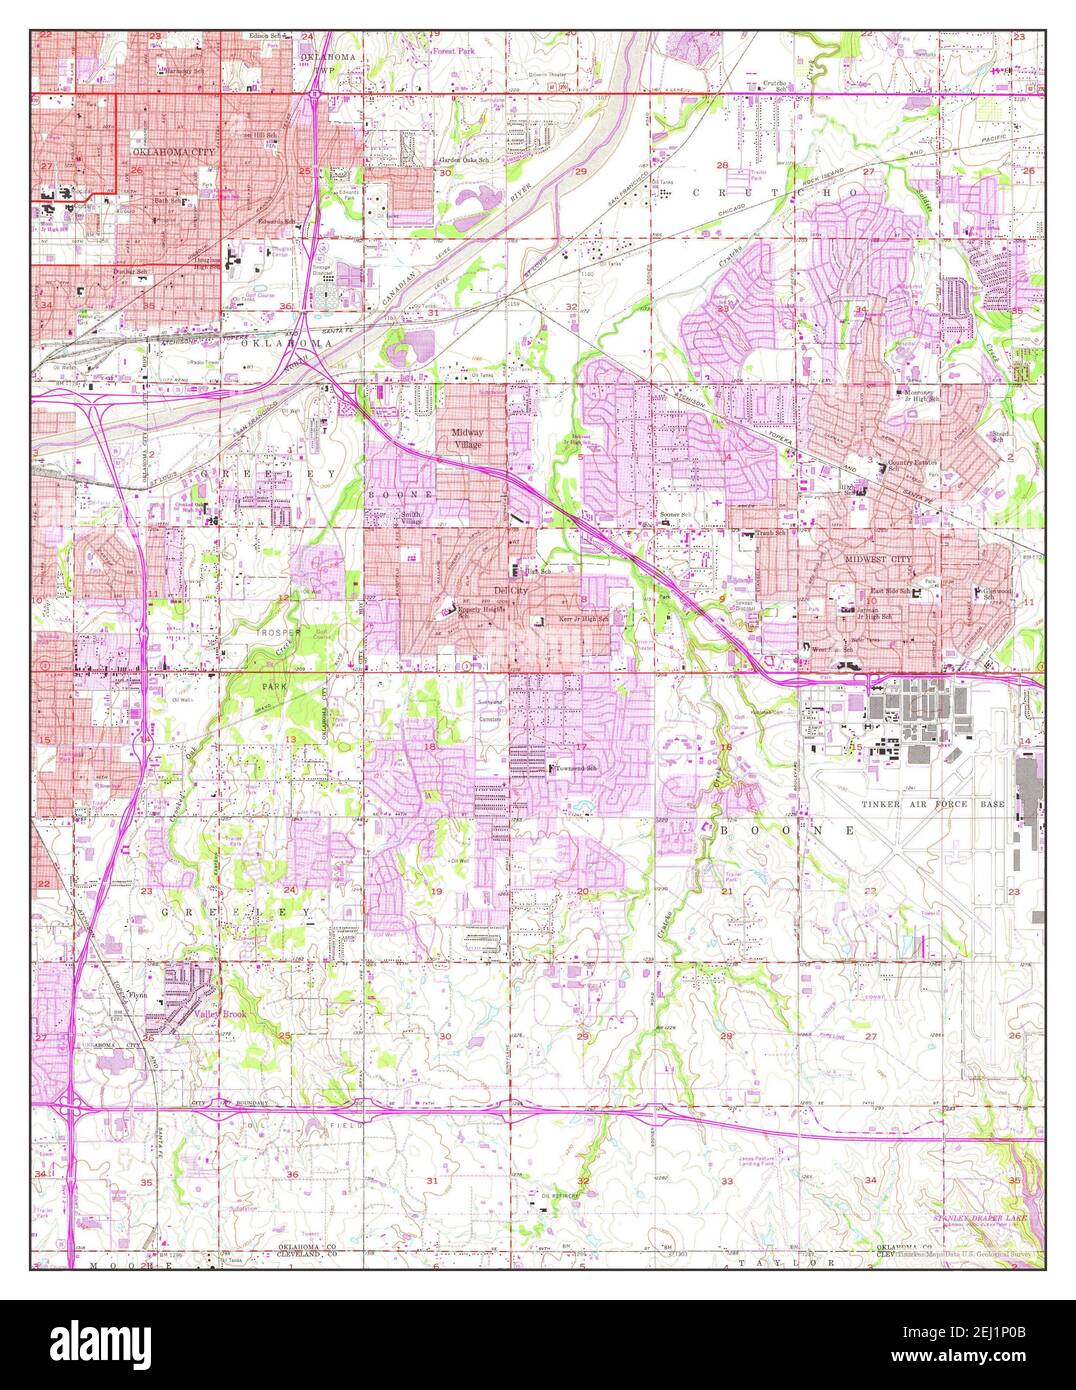 Midwest City Oklahoma Map 1956 124000 United States Of America By Timeless Maps Data Us Geological Survey 2EJ1P0B 